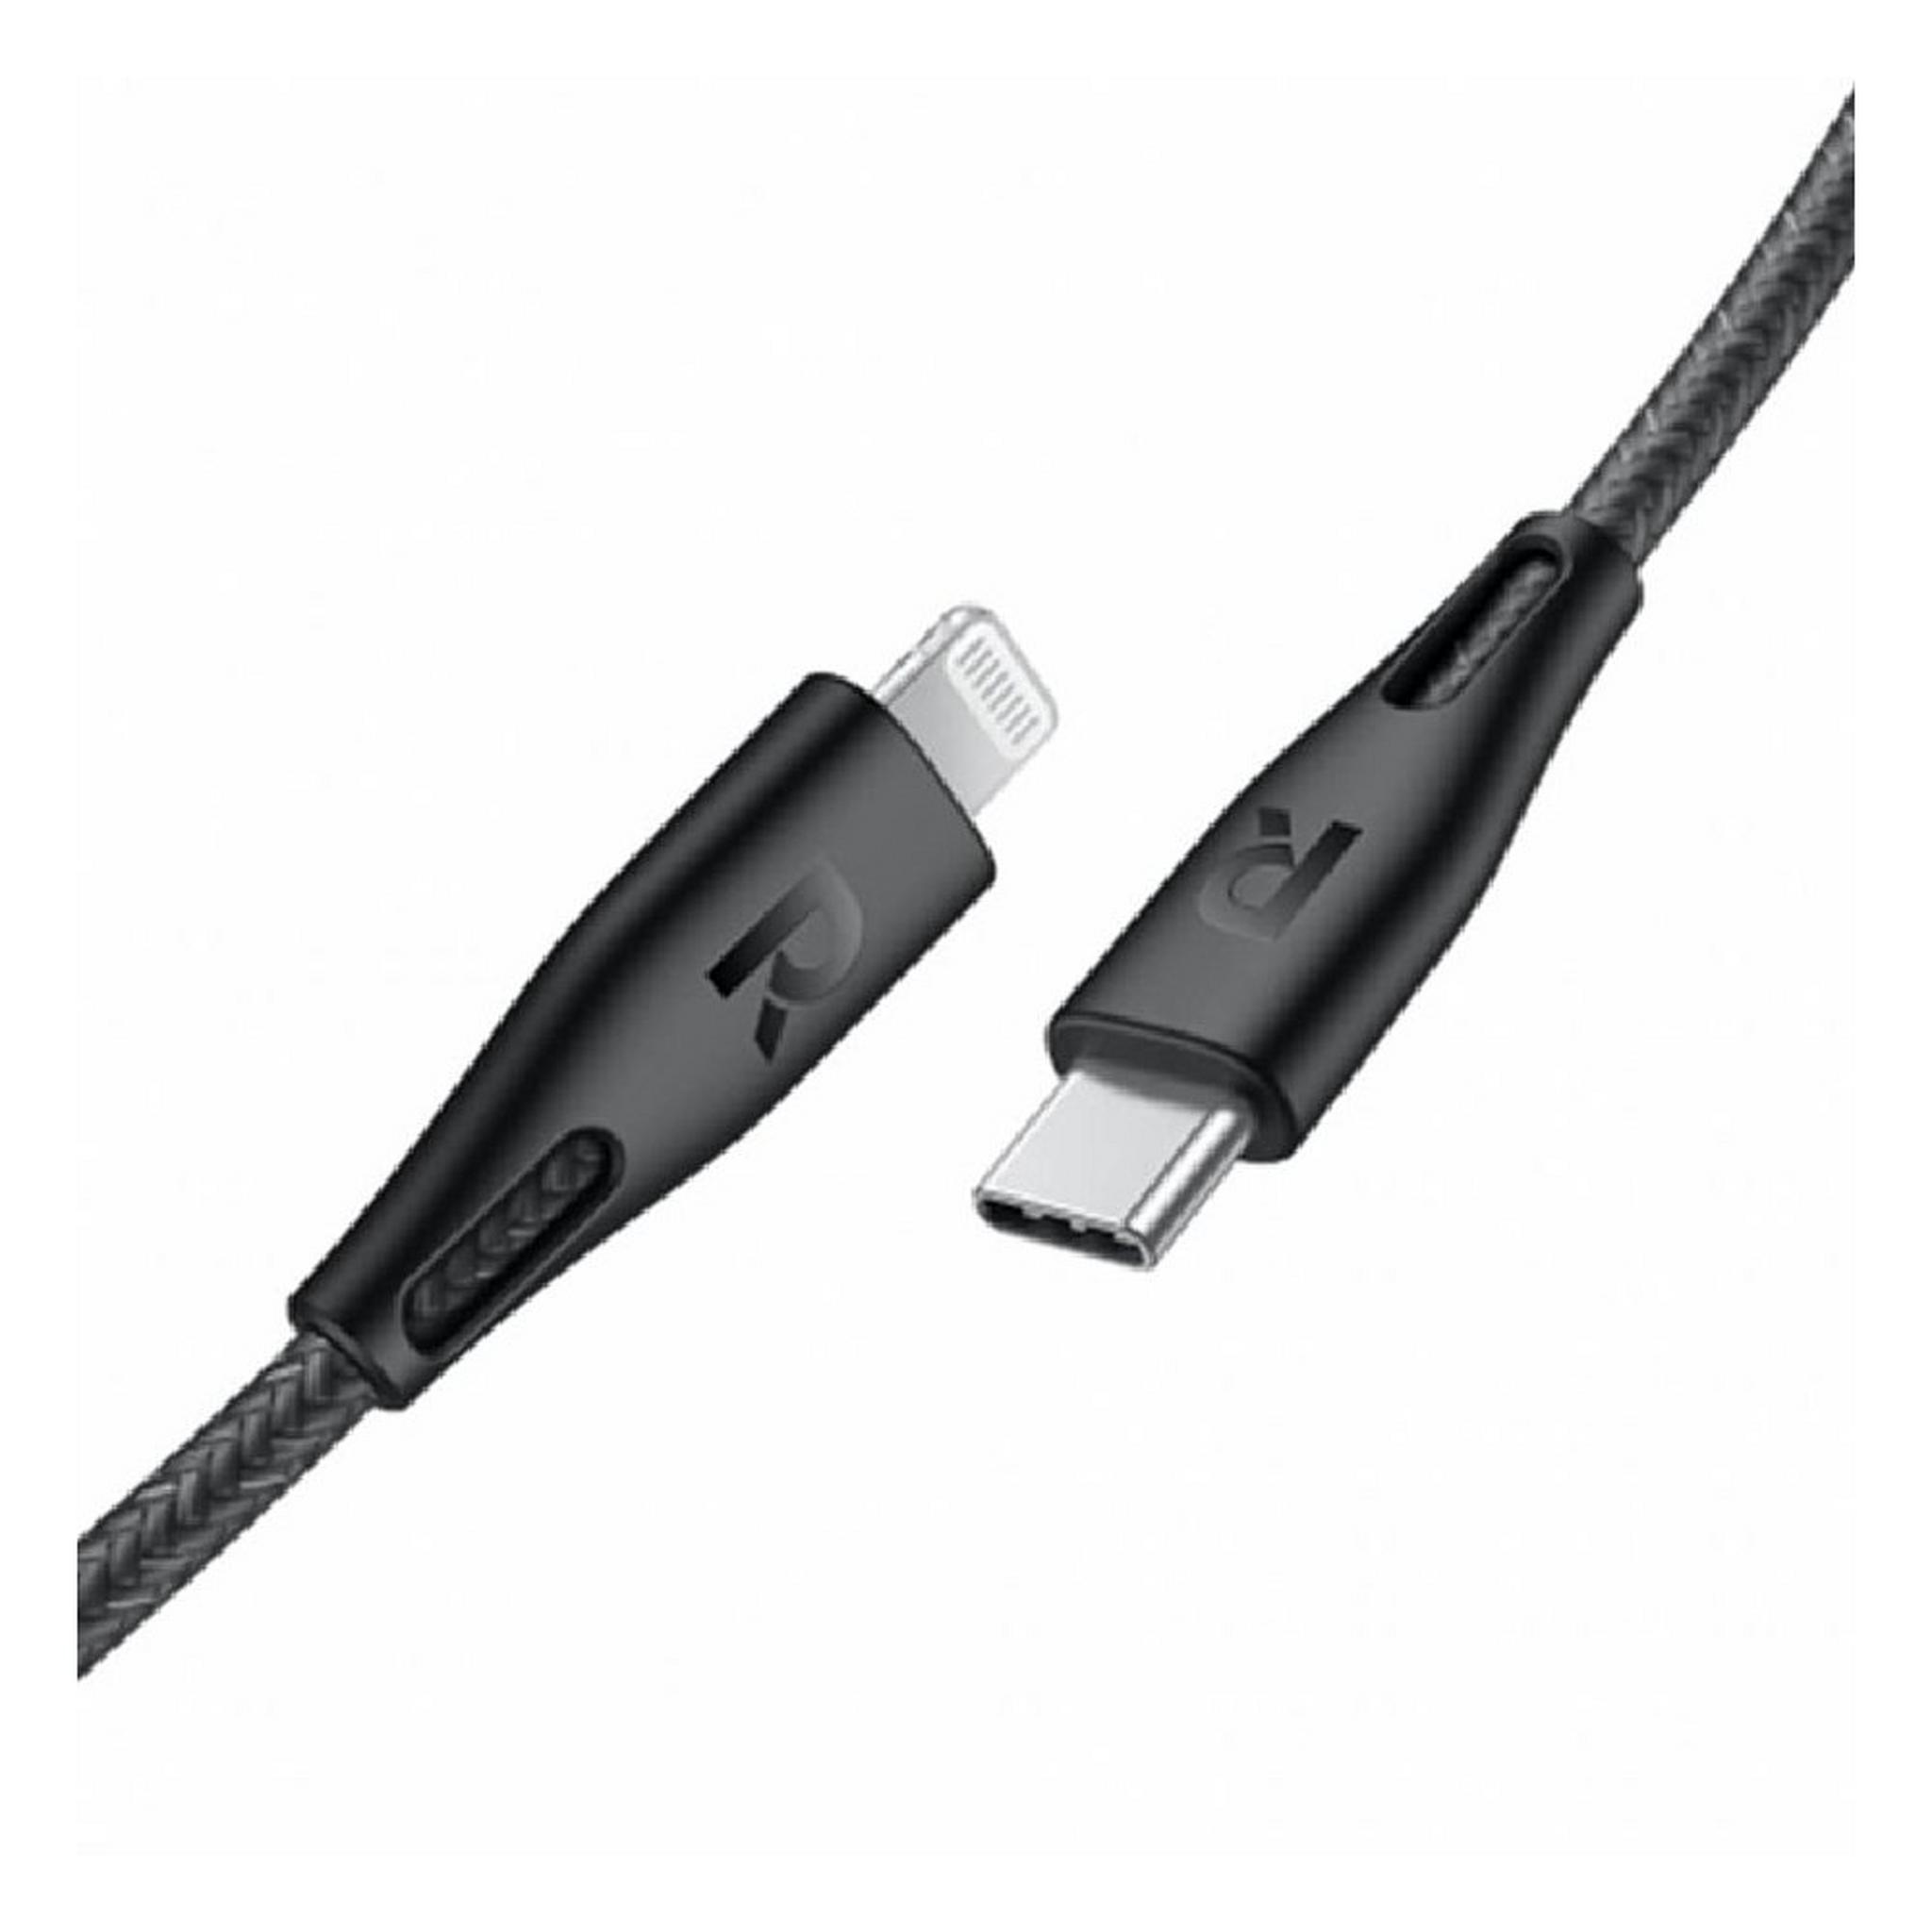 Ravpower Type-C To Lightning Data Sync Charging Cable (2 Meters) - Black